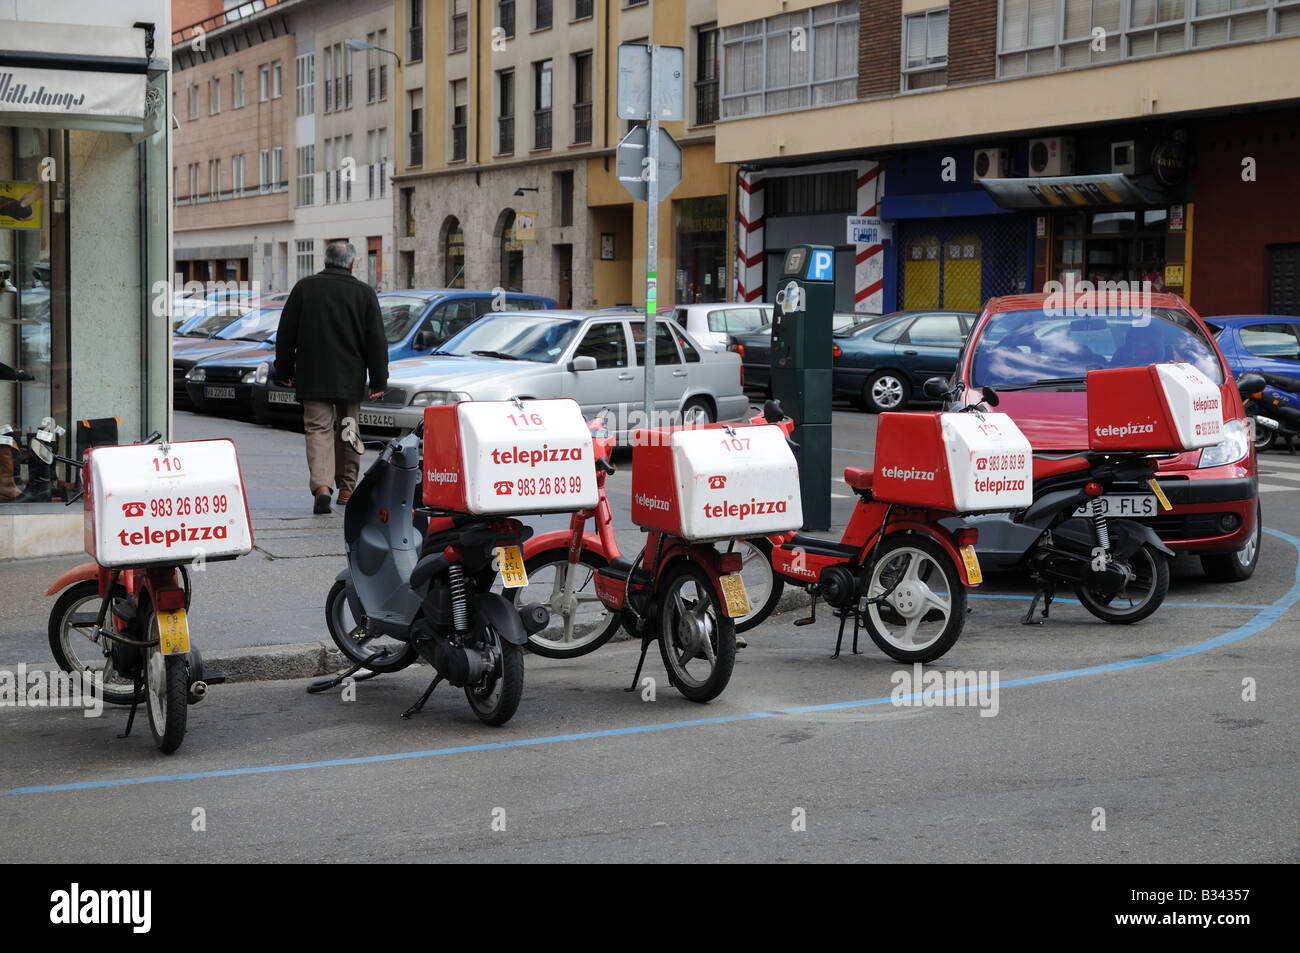 Line of moped motorbikes marked telepizza parked in Valladolid Spain Stock Photo